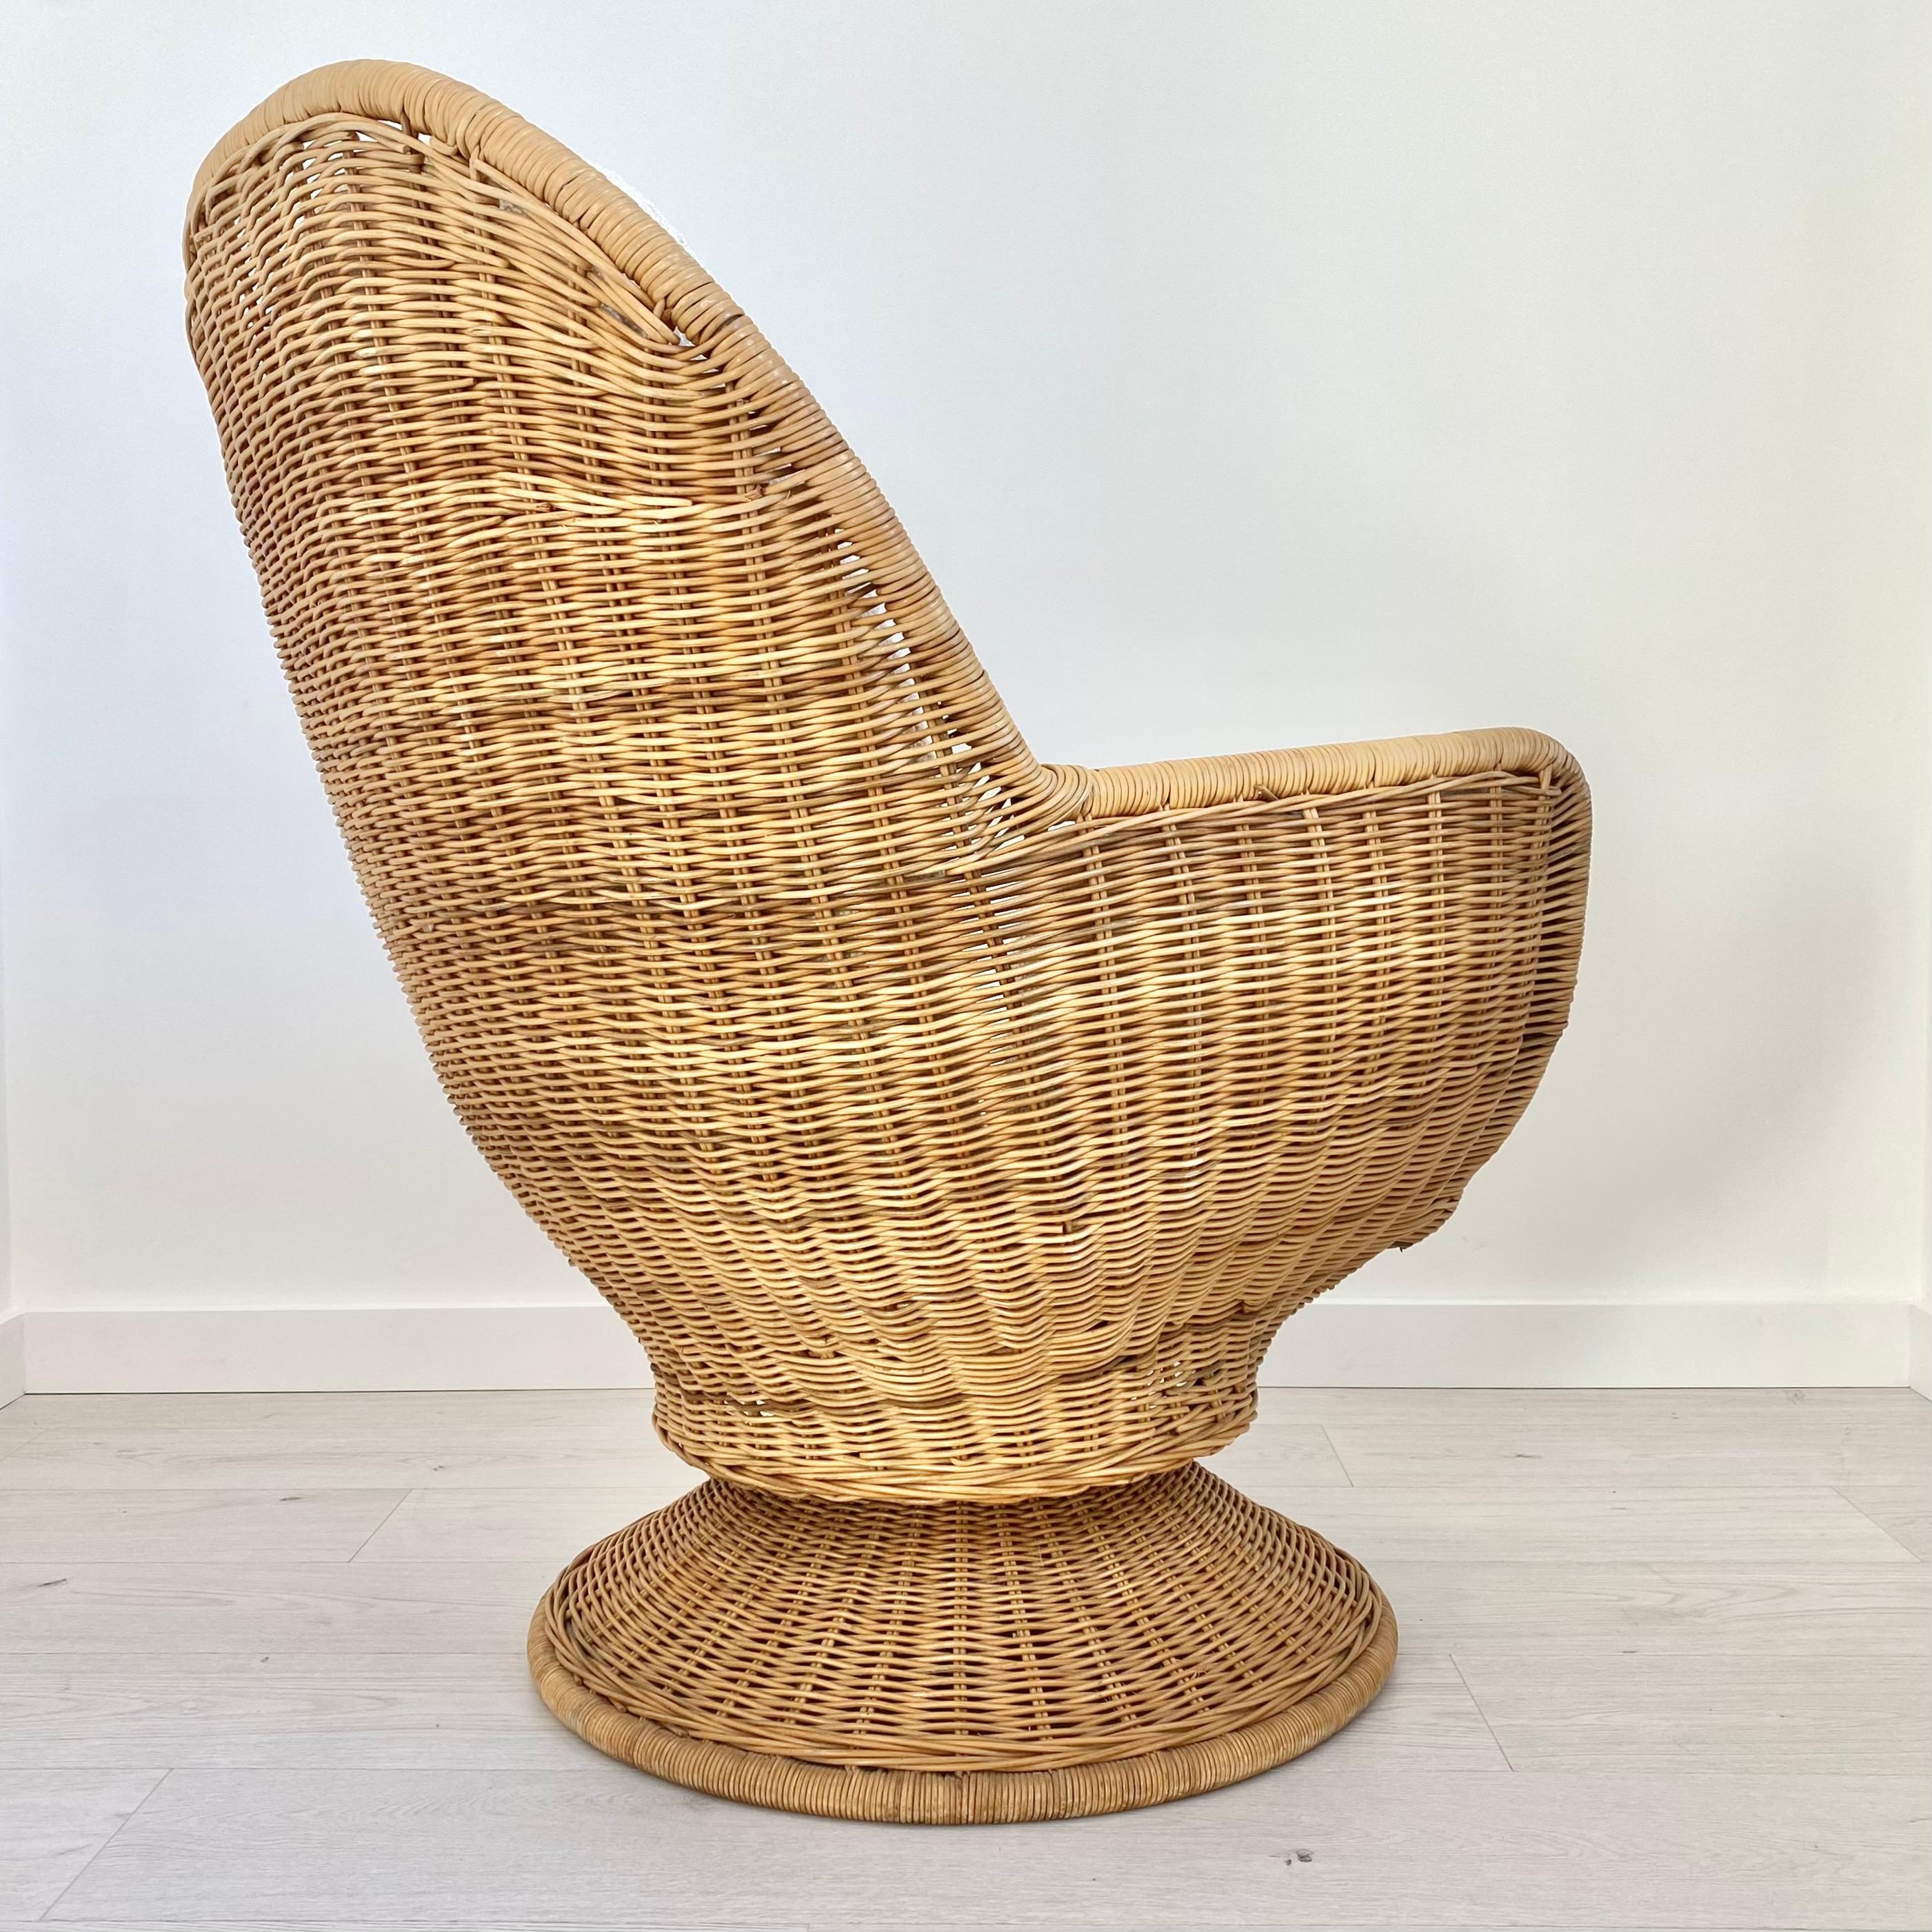 Late 20th Century Wicker Swivel Chair in Wool Boucle, 1970s USA For Sale